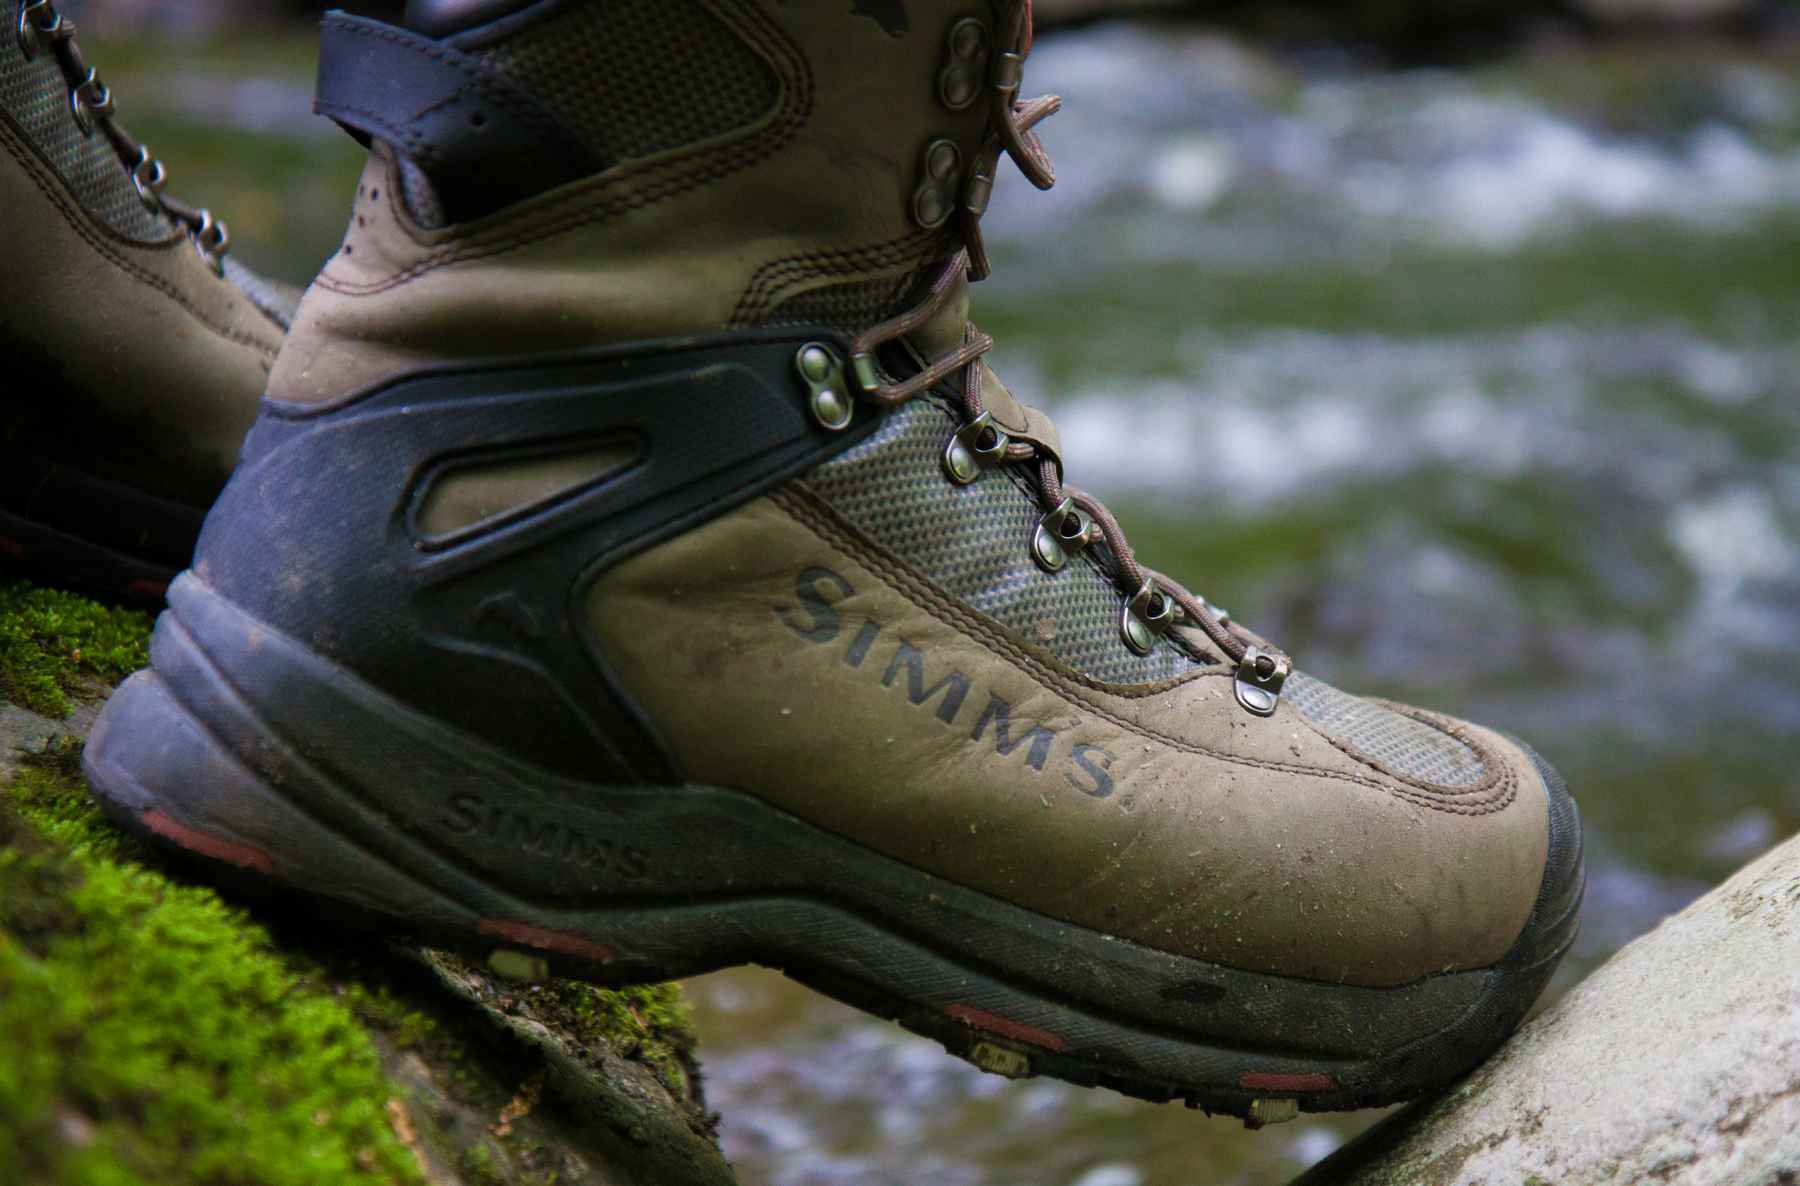 http://www.hatchmag.com/sites/default/files/styles/extra-large/public/field/image/simms_g3_boot_2.jpg